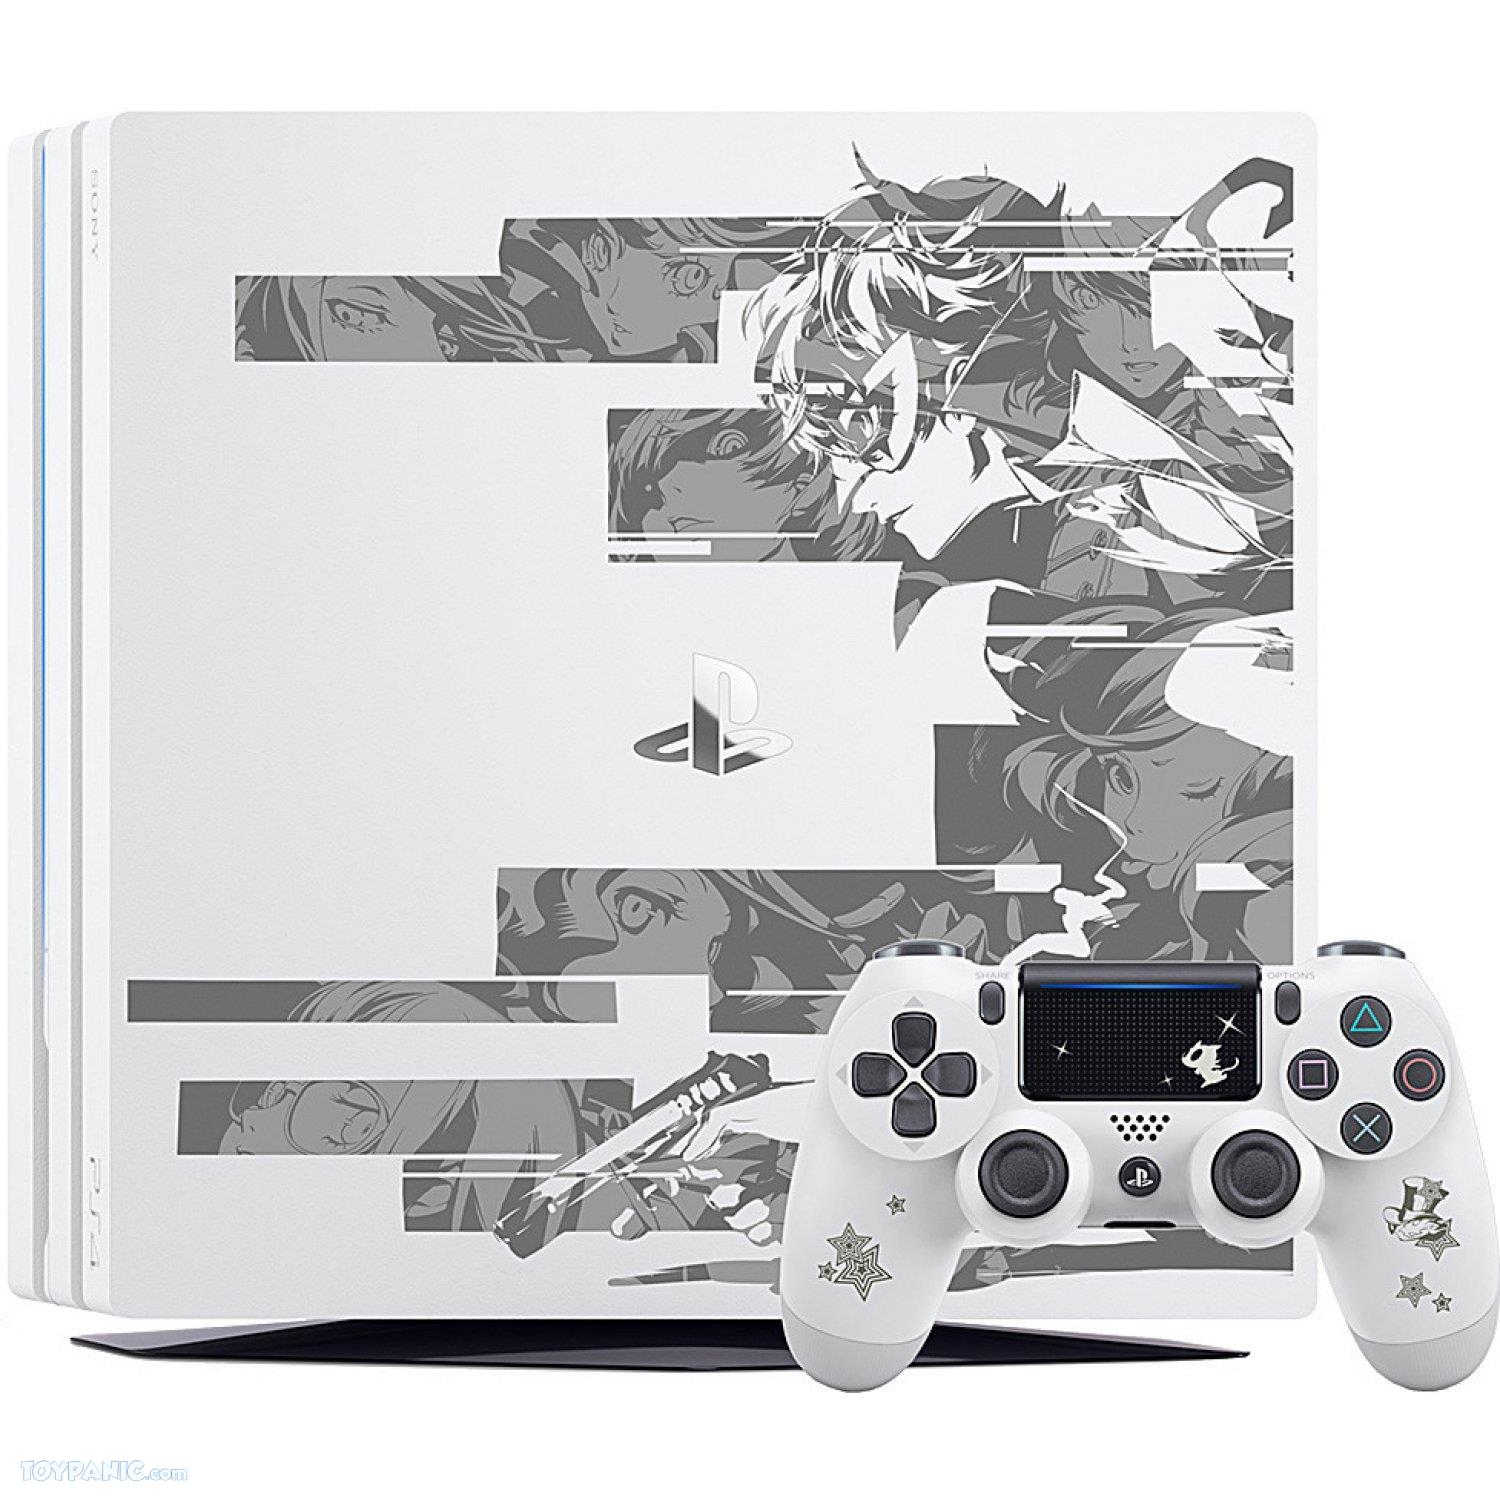 ps4 pro limited edition 1tb